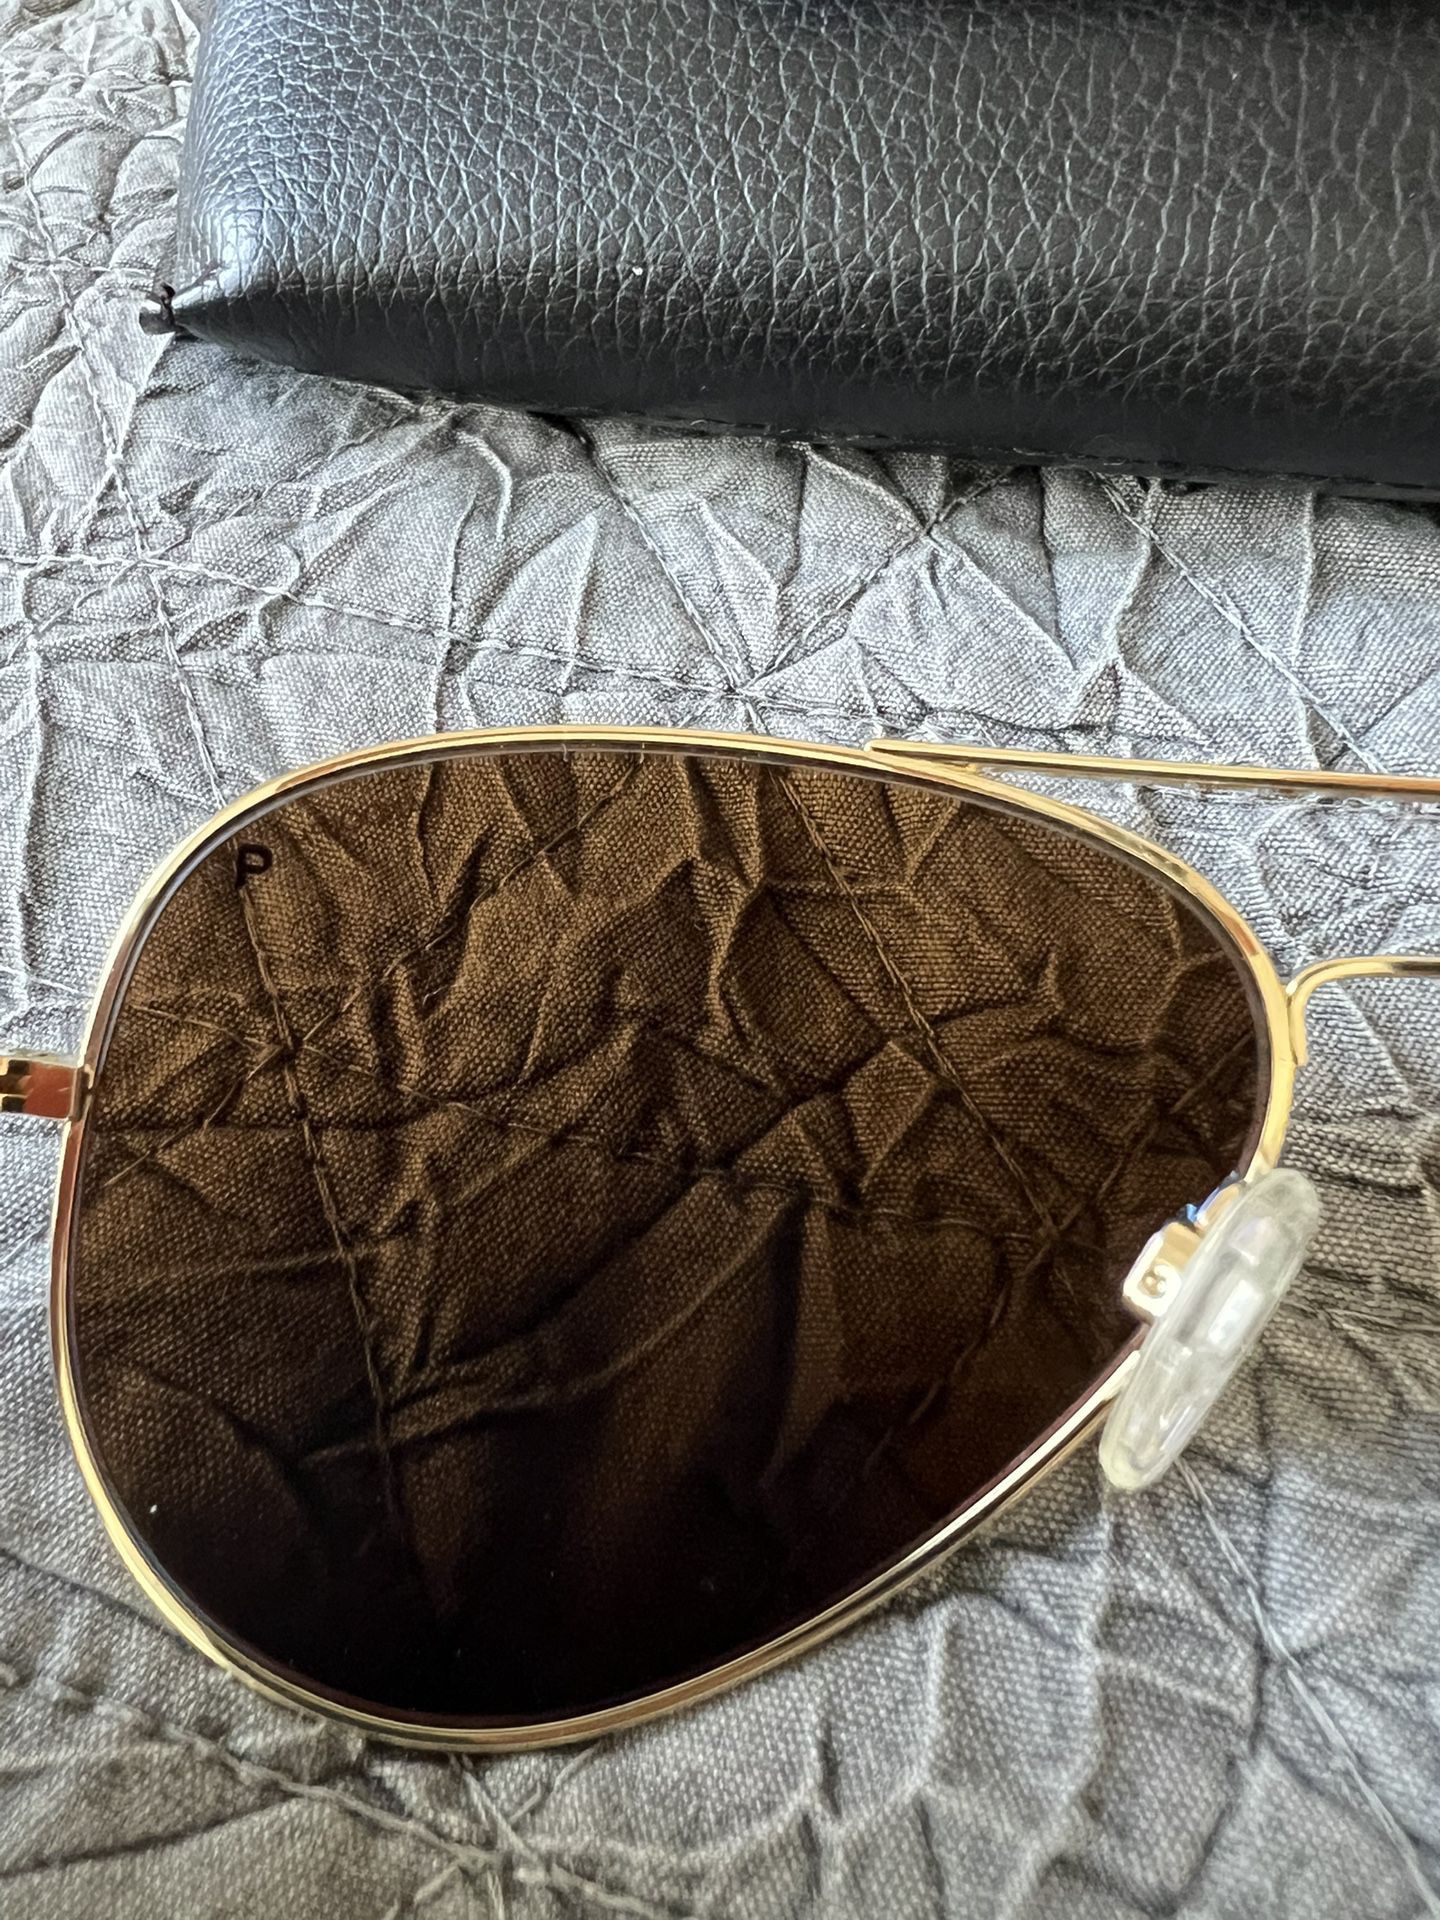 Lv Cosmetic Pouch Gm for Sale in Phoenix, AZ - OfferUp